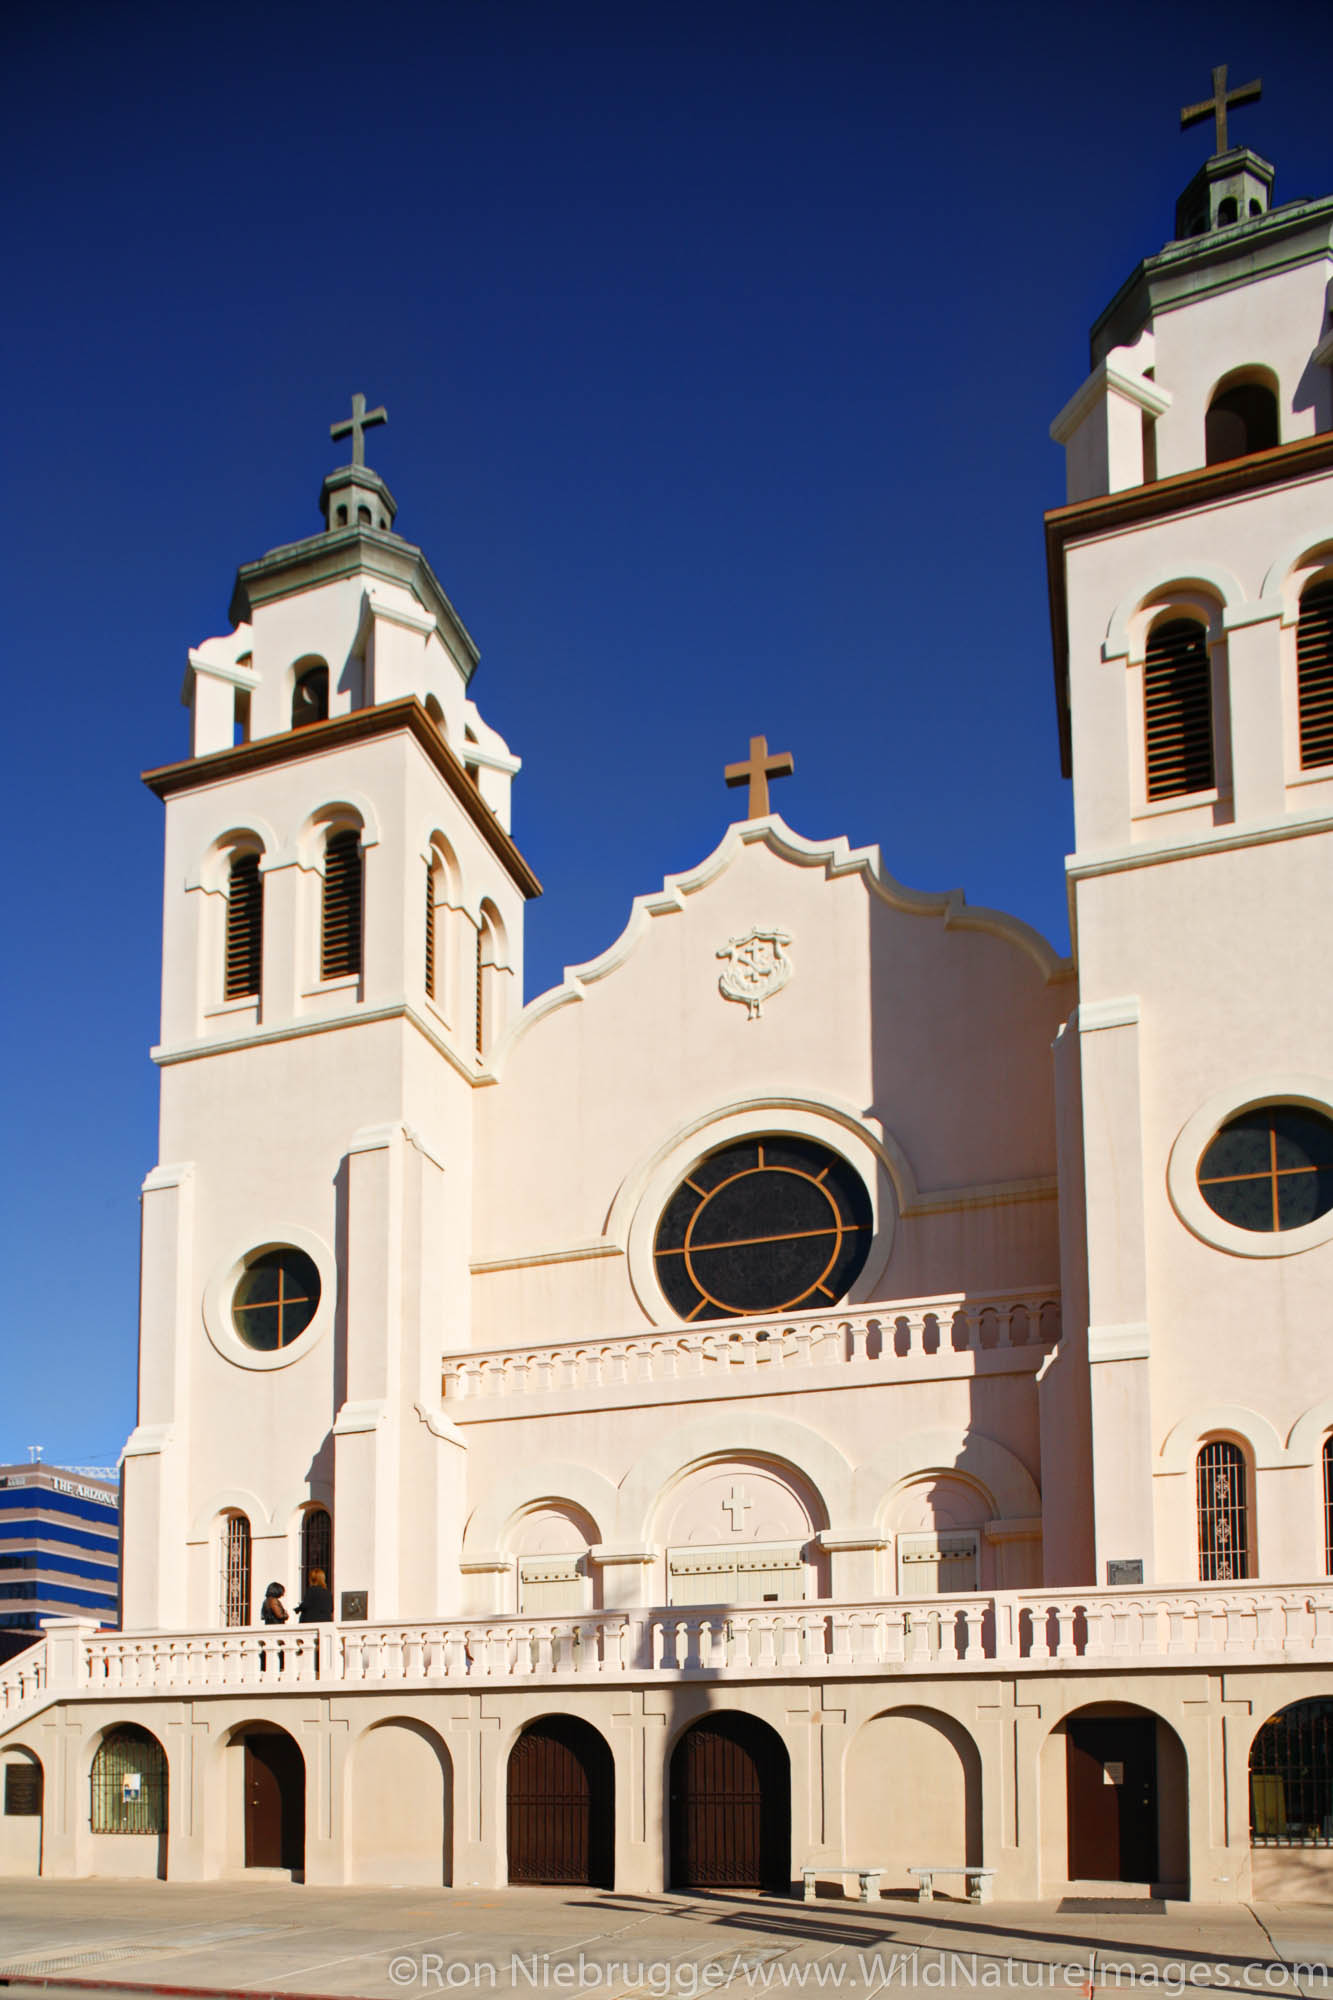 St. Mary's Basilica is the oldest Catholic church in Phoenix founded in 1881, Phoenix, Arizona.